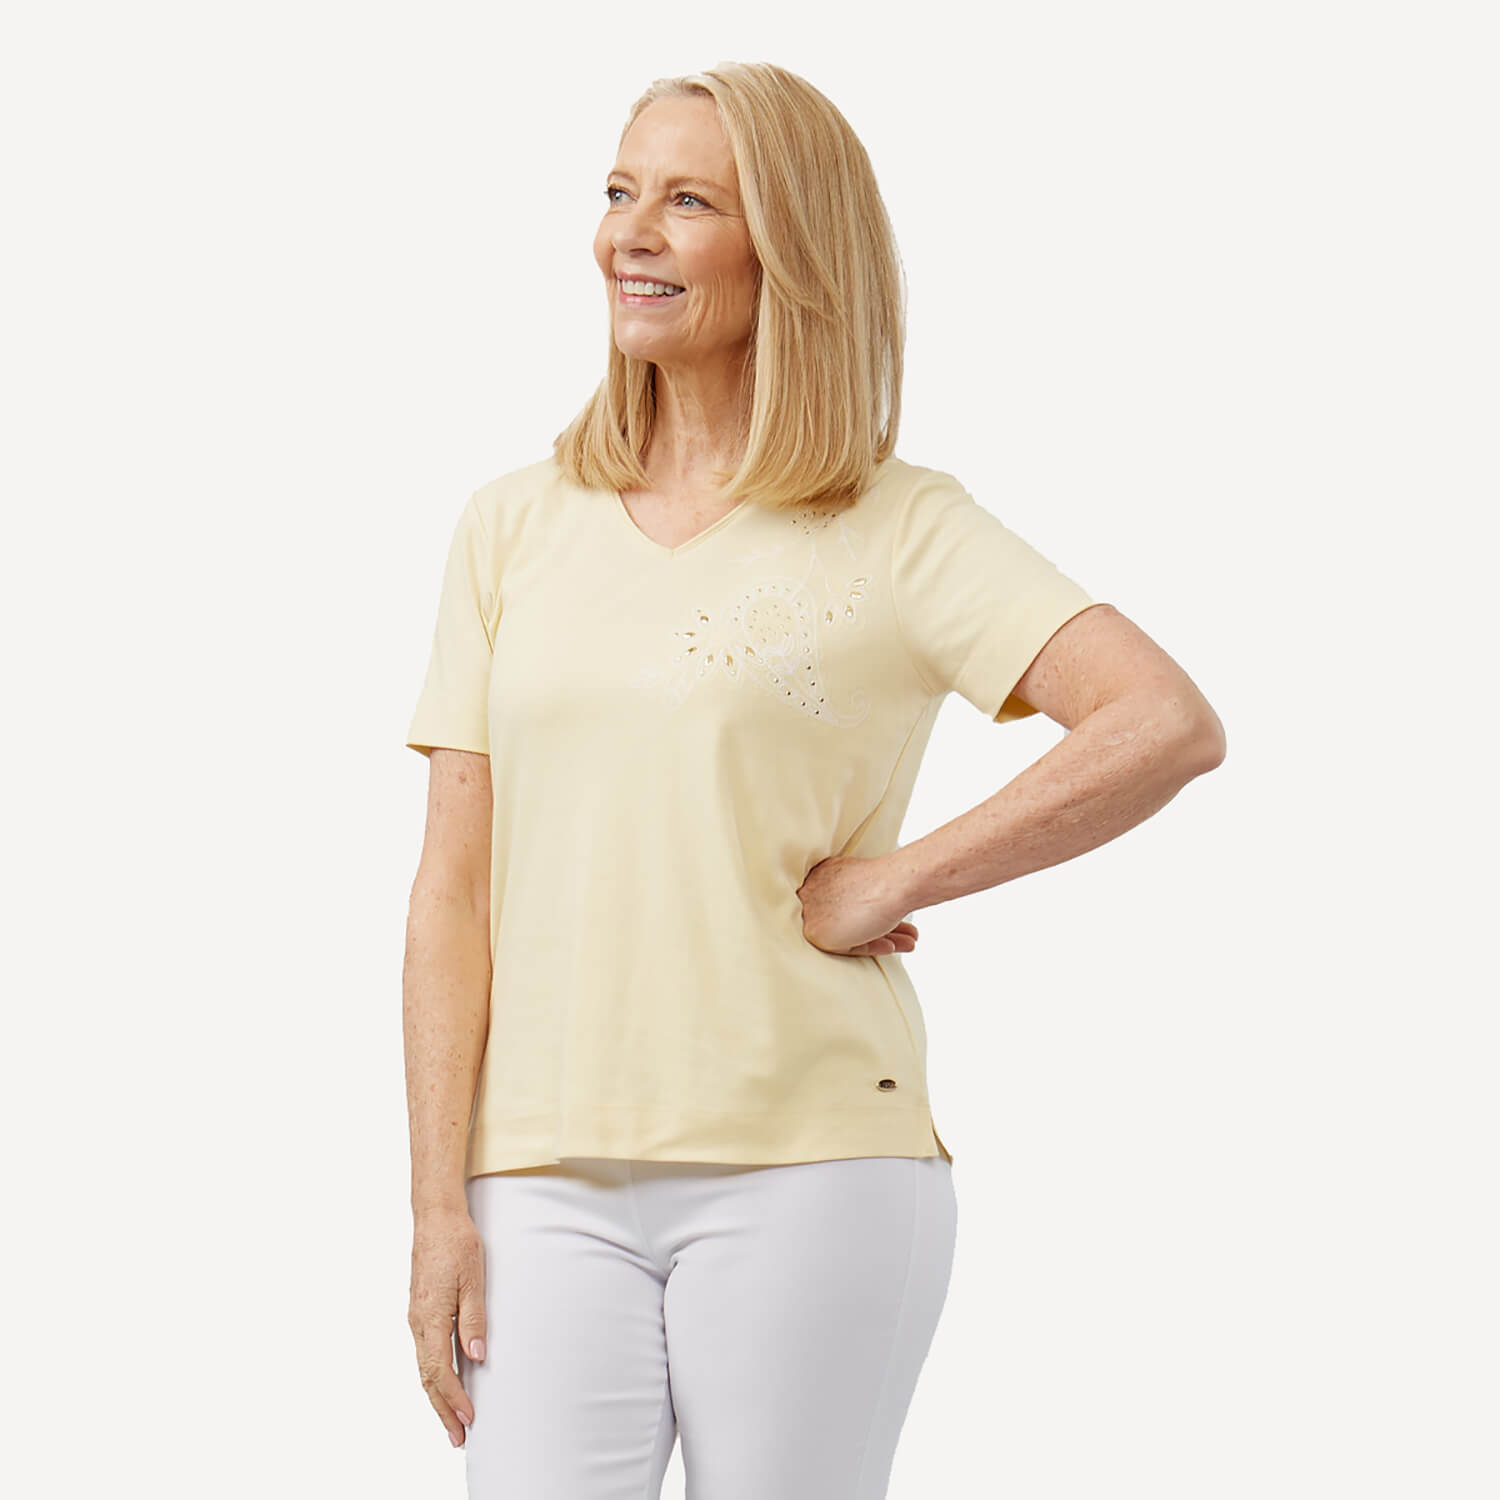 Tigiwear Floral Embroidered Top - Lemon 1 Shaws Department Stores